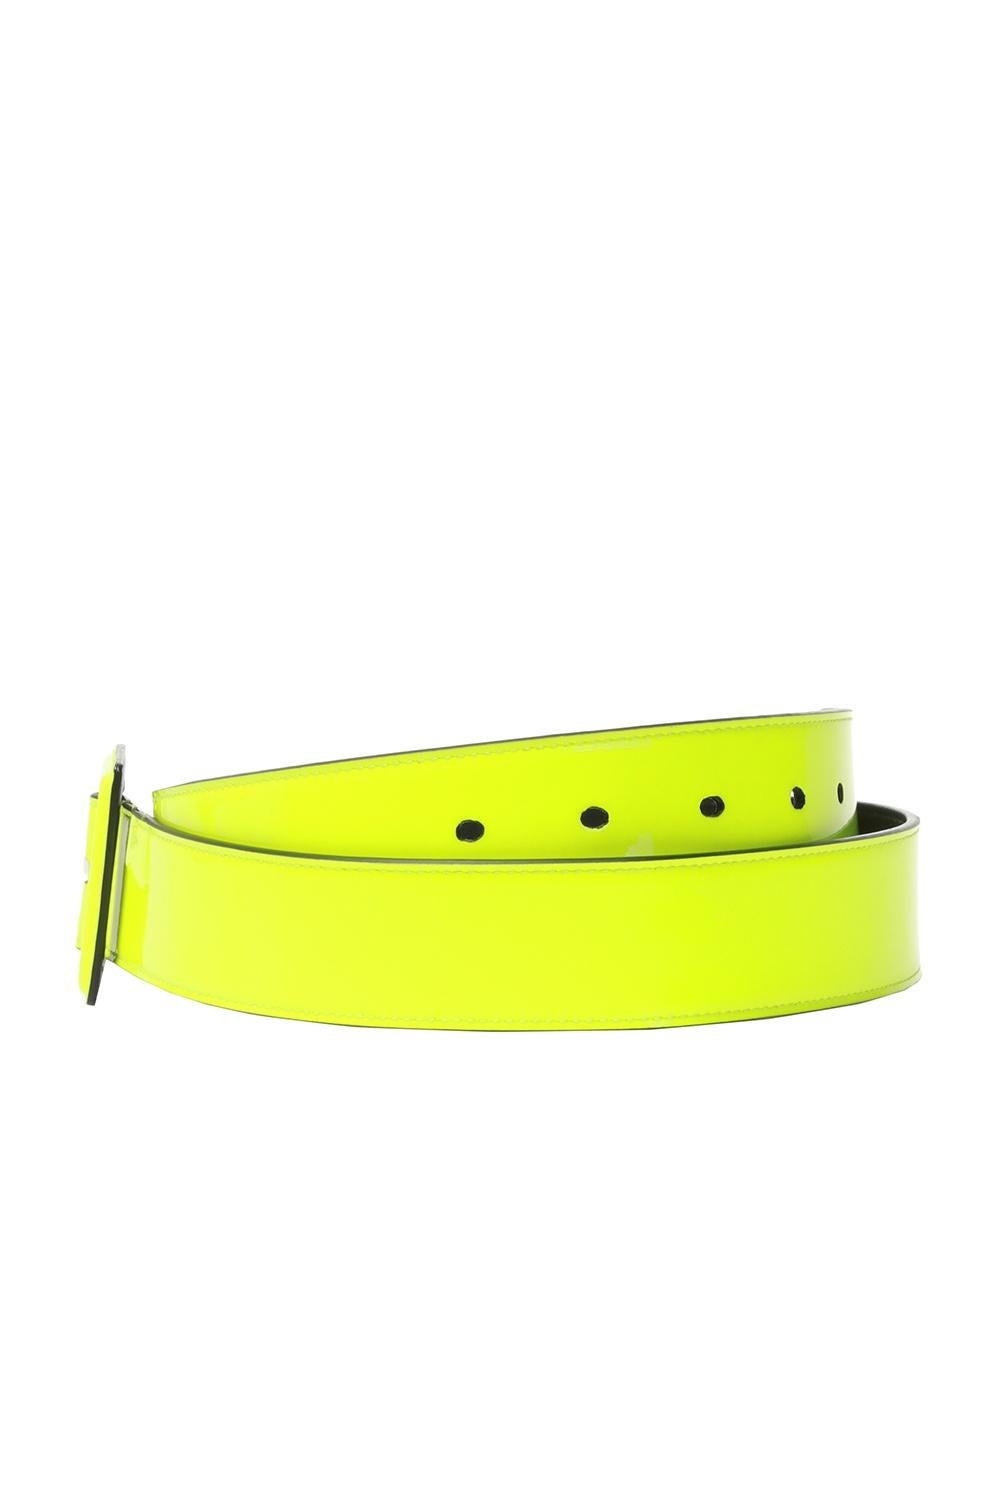 Saint Laurent Runway Neon Yellow Square Buckle Patent Leather Belt

As seen on the Runway, this belt will easily brighten up your wardrobe. Featuring neon yellow laminated leather and a square buckle. Brand new. Made in Italy.

Size: 75